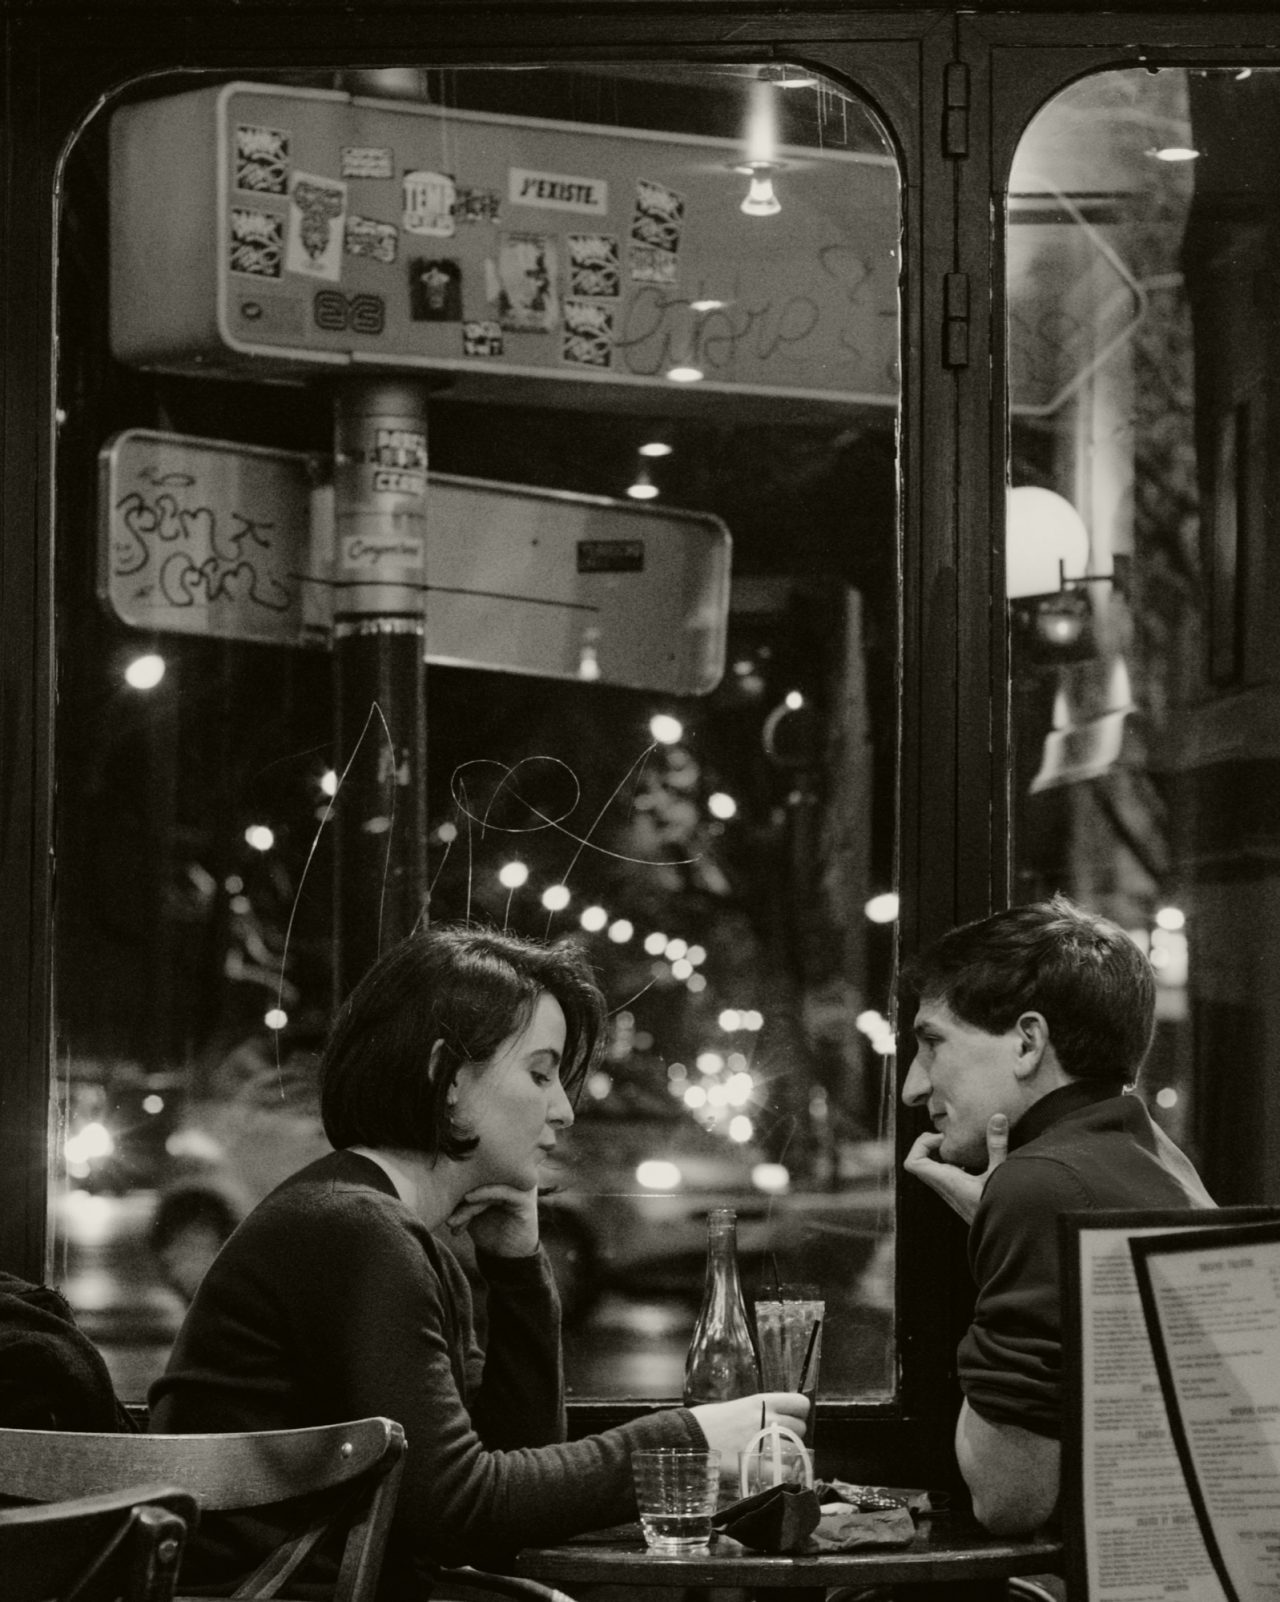 Black and white man and women on date at a cafe